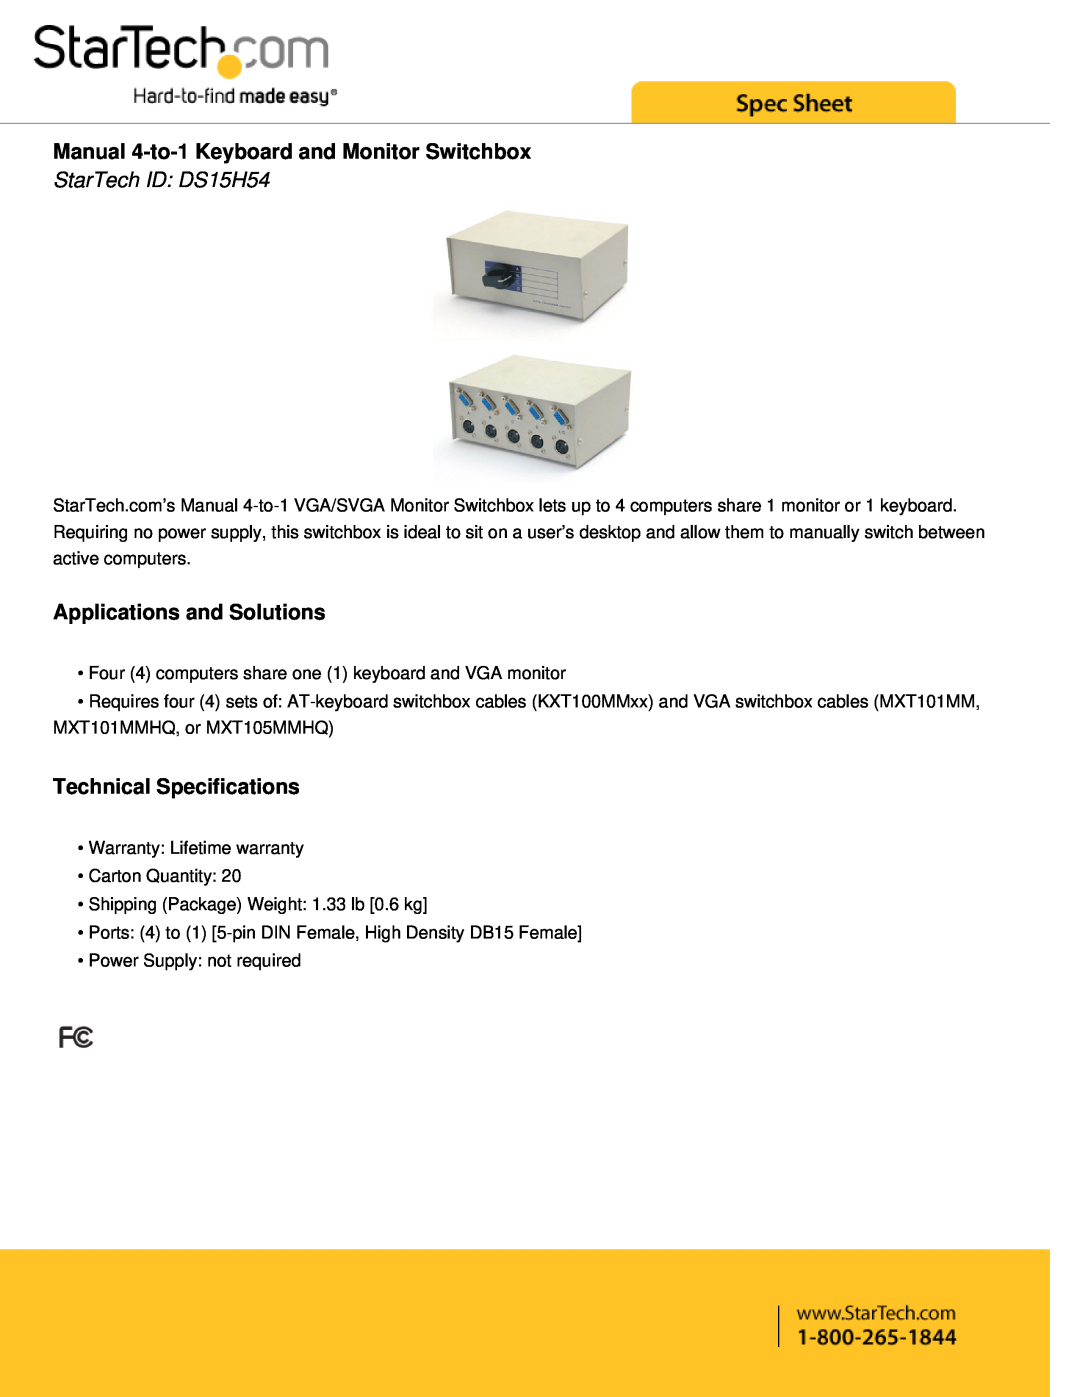 StarTech.com technical specifications Manual 4-to-1 Keyboard and Monitor Switchbox, StarTech ID DS15H54 